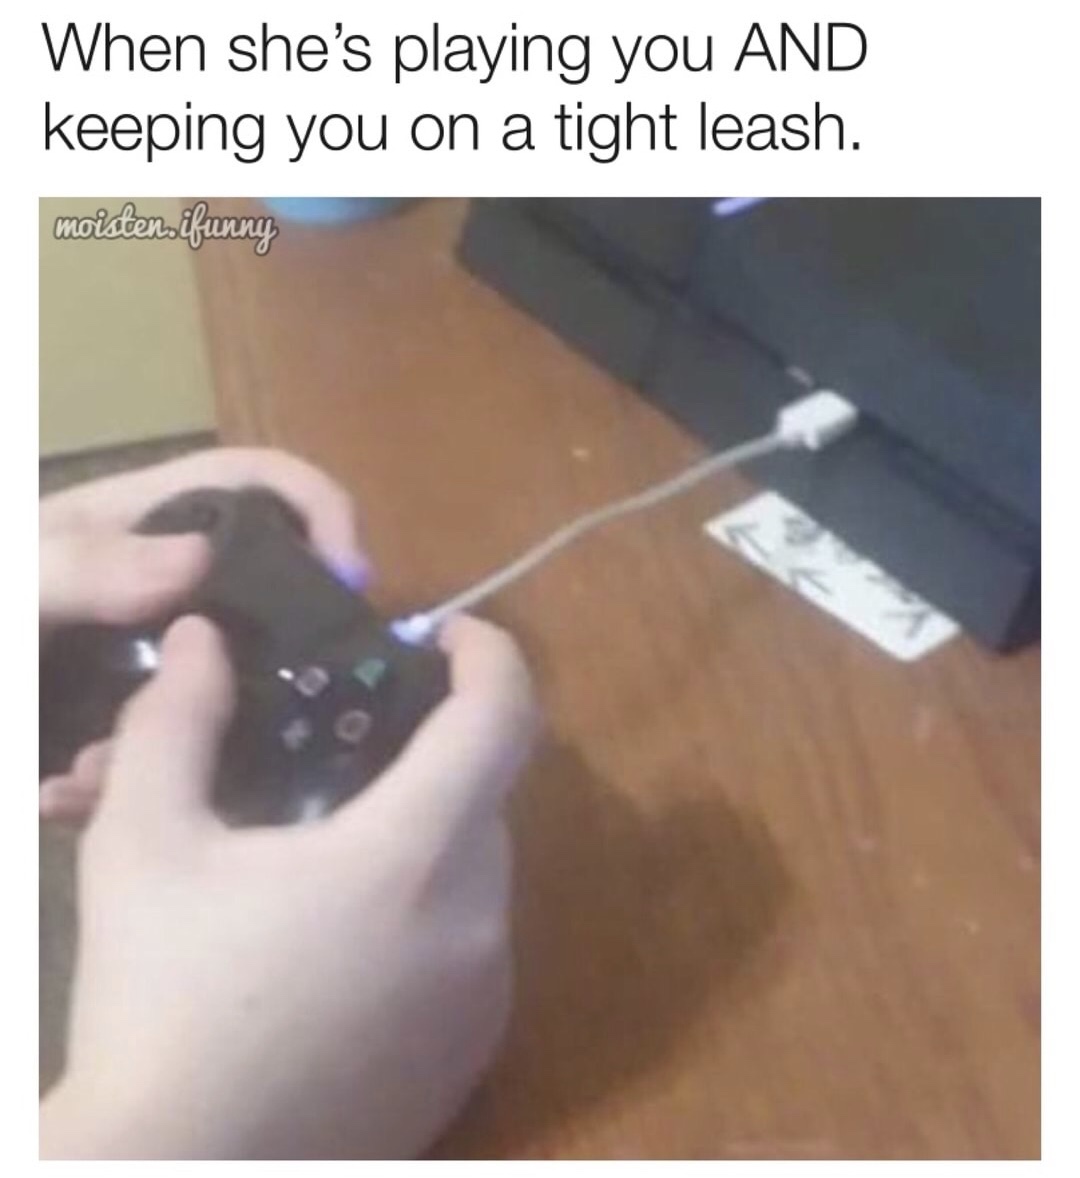 funny meme about being kept on a short leash with pic of a playstation controller with a short cord